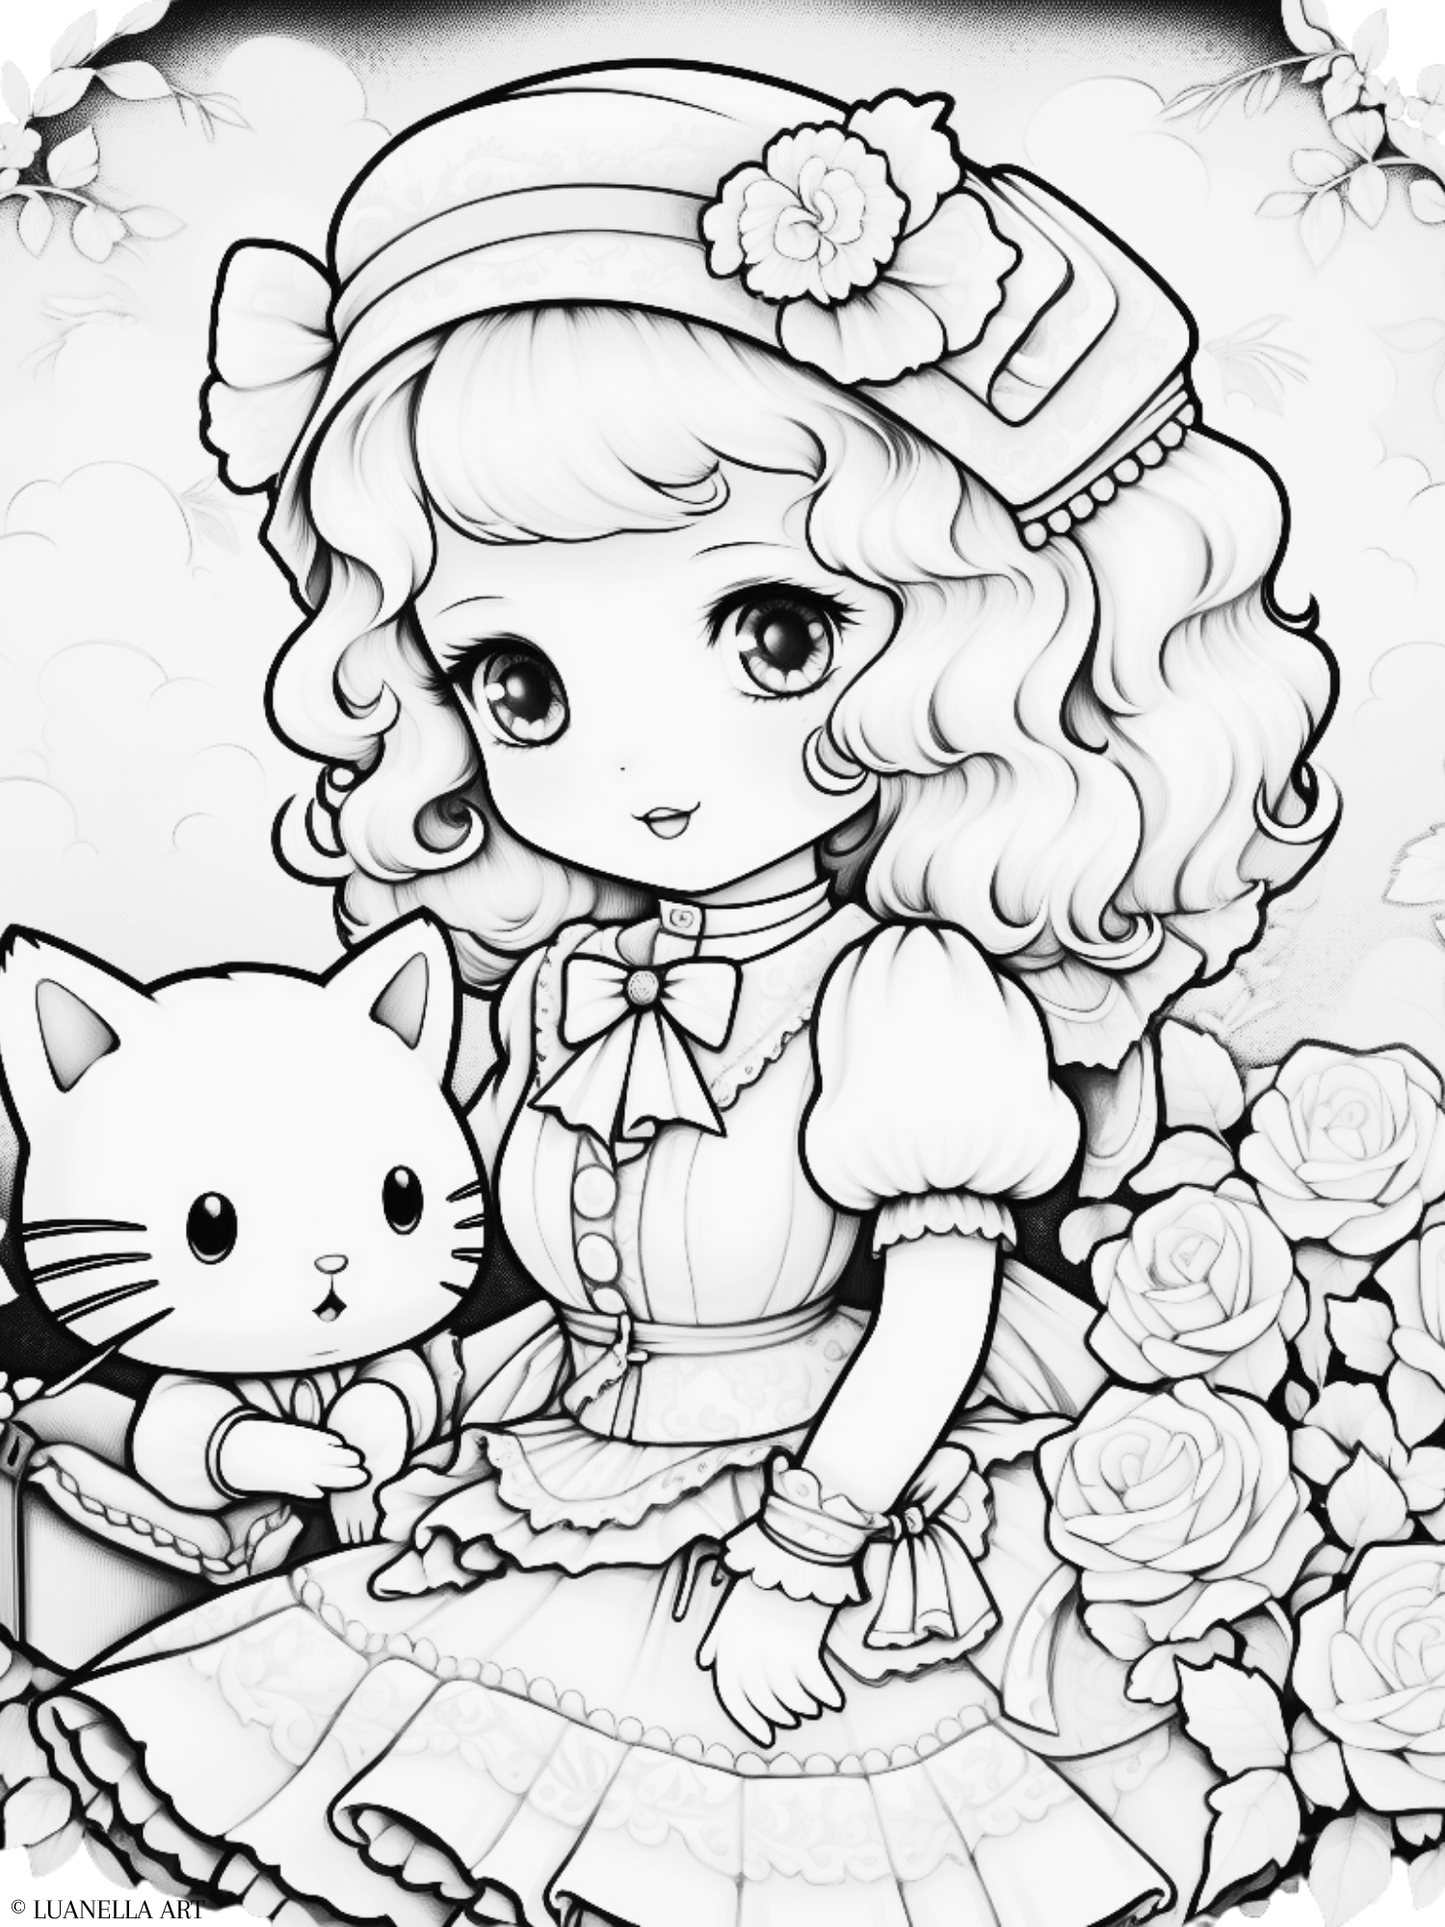 Charming My Melody and Kitty Sanrio characters | Coloring Page | Instant Digital Download